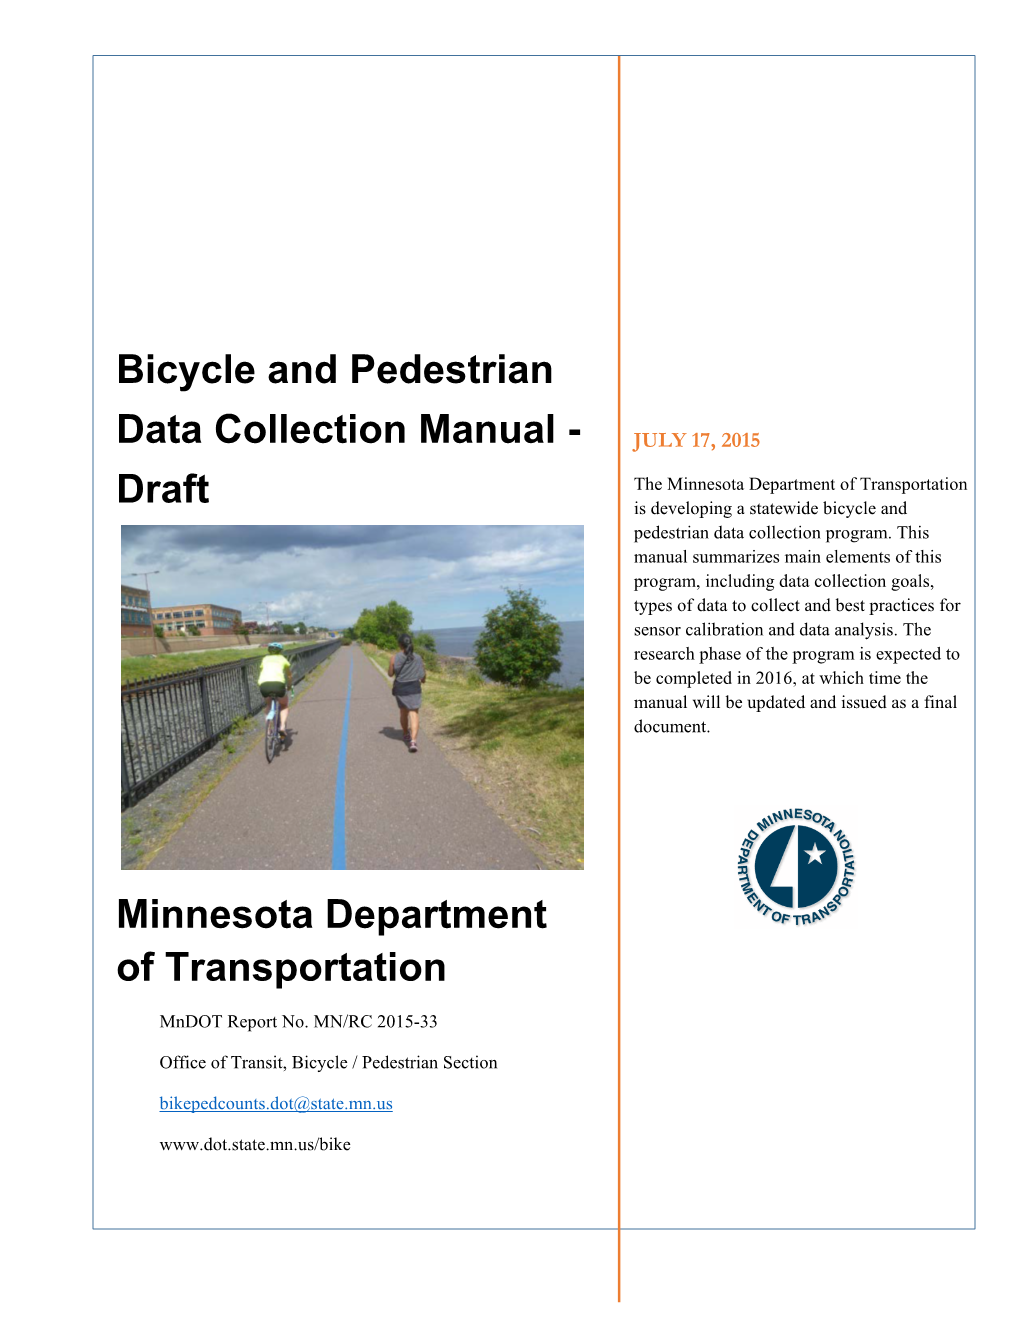 Bicycle and Pedestrian Data Collection Manual - Draft July 2015 6